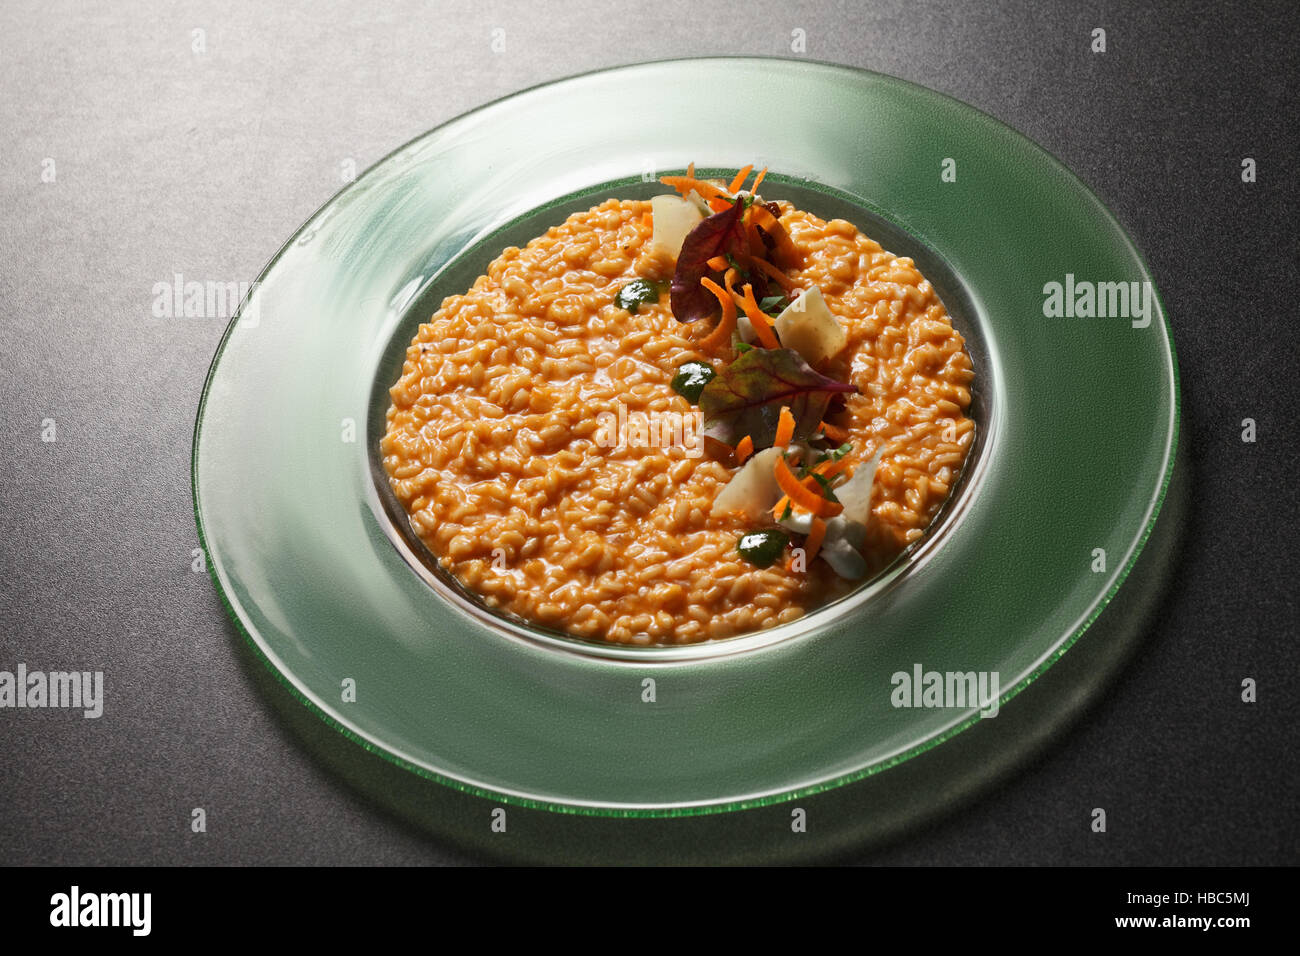 Risotto parmigiano on a tabletop Stock Photo